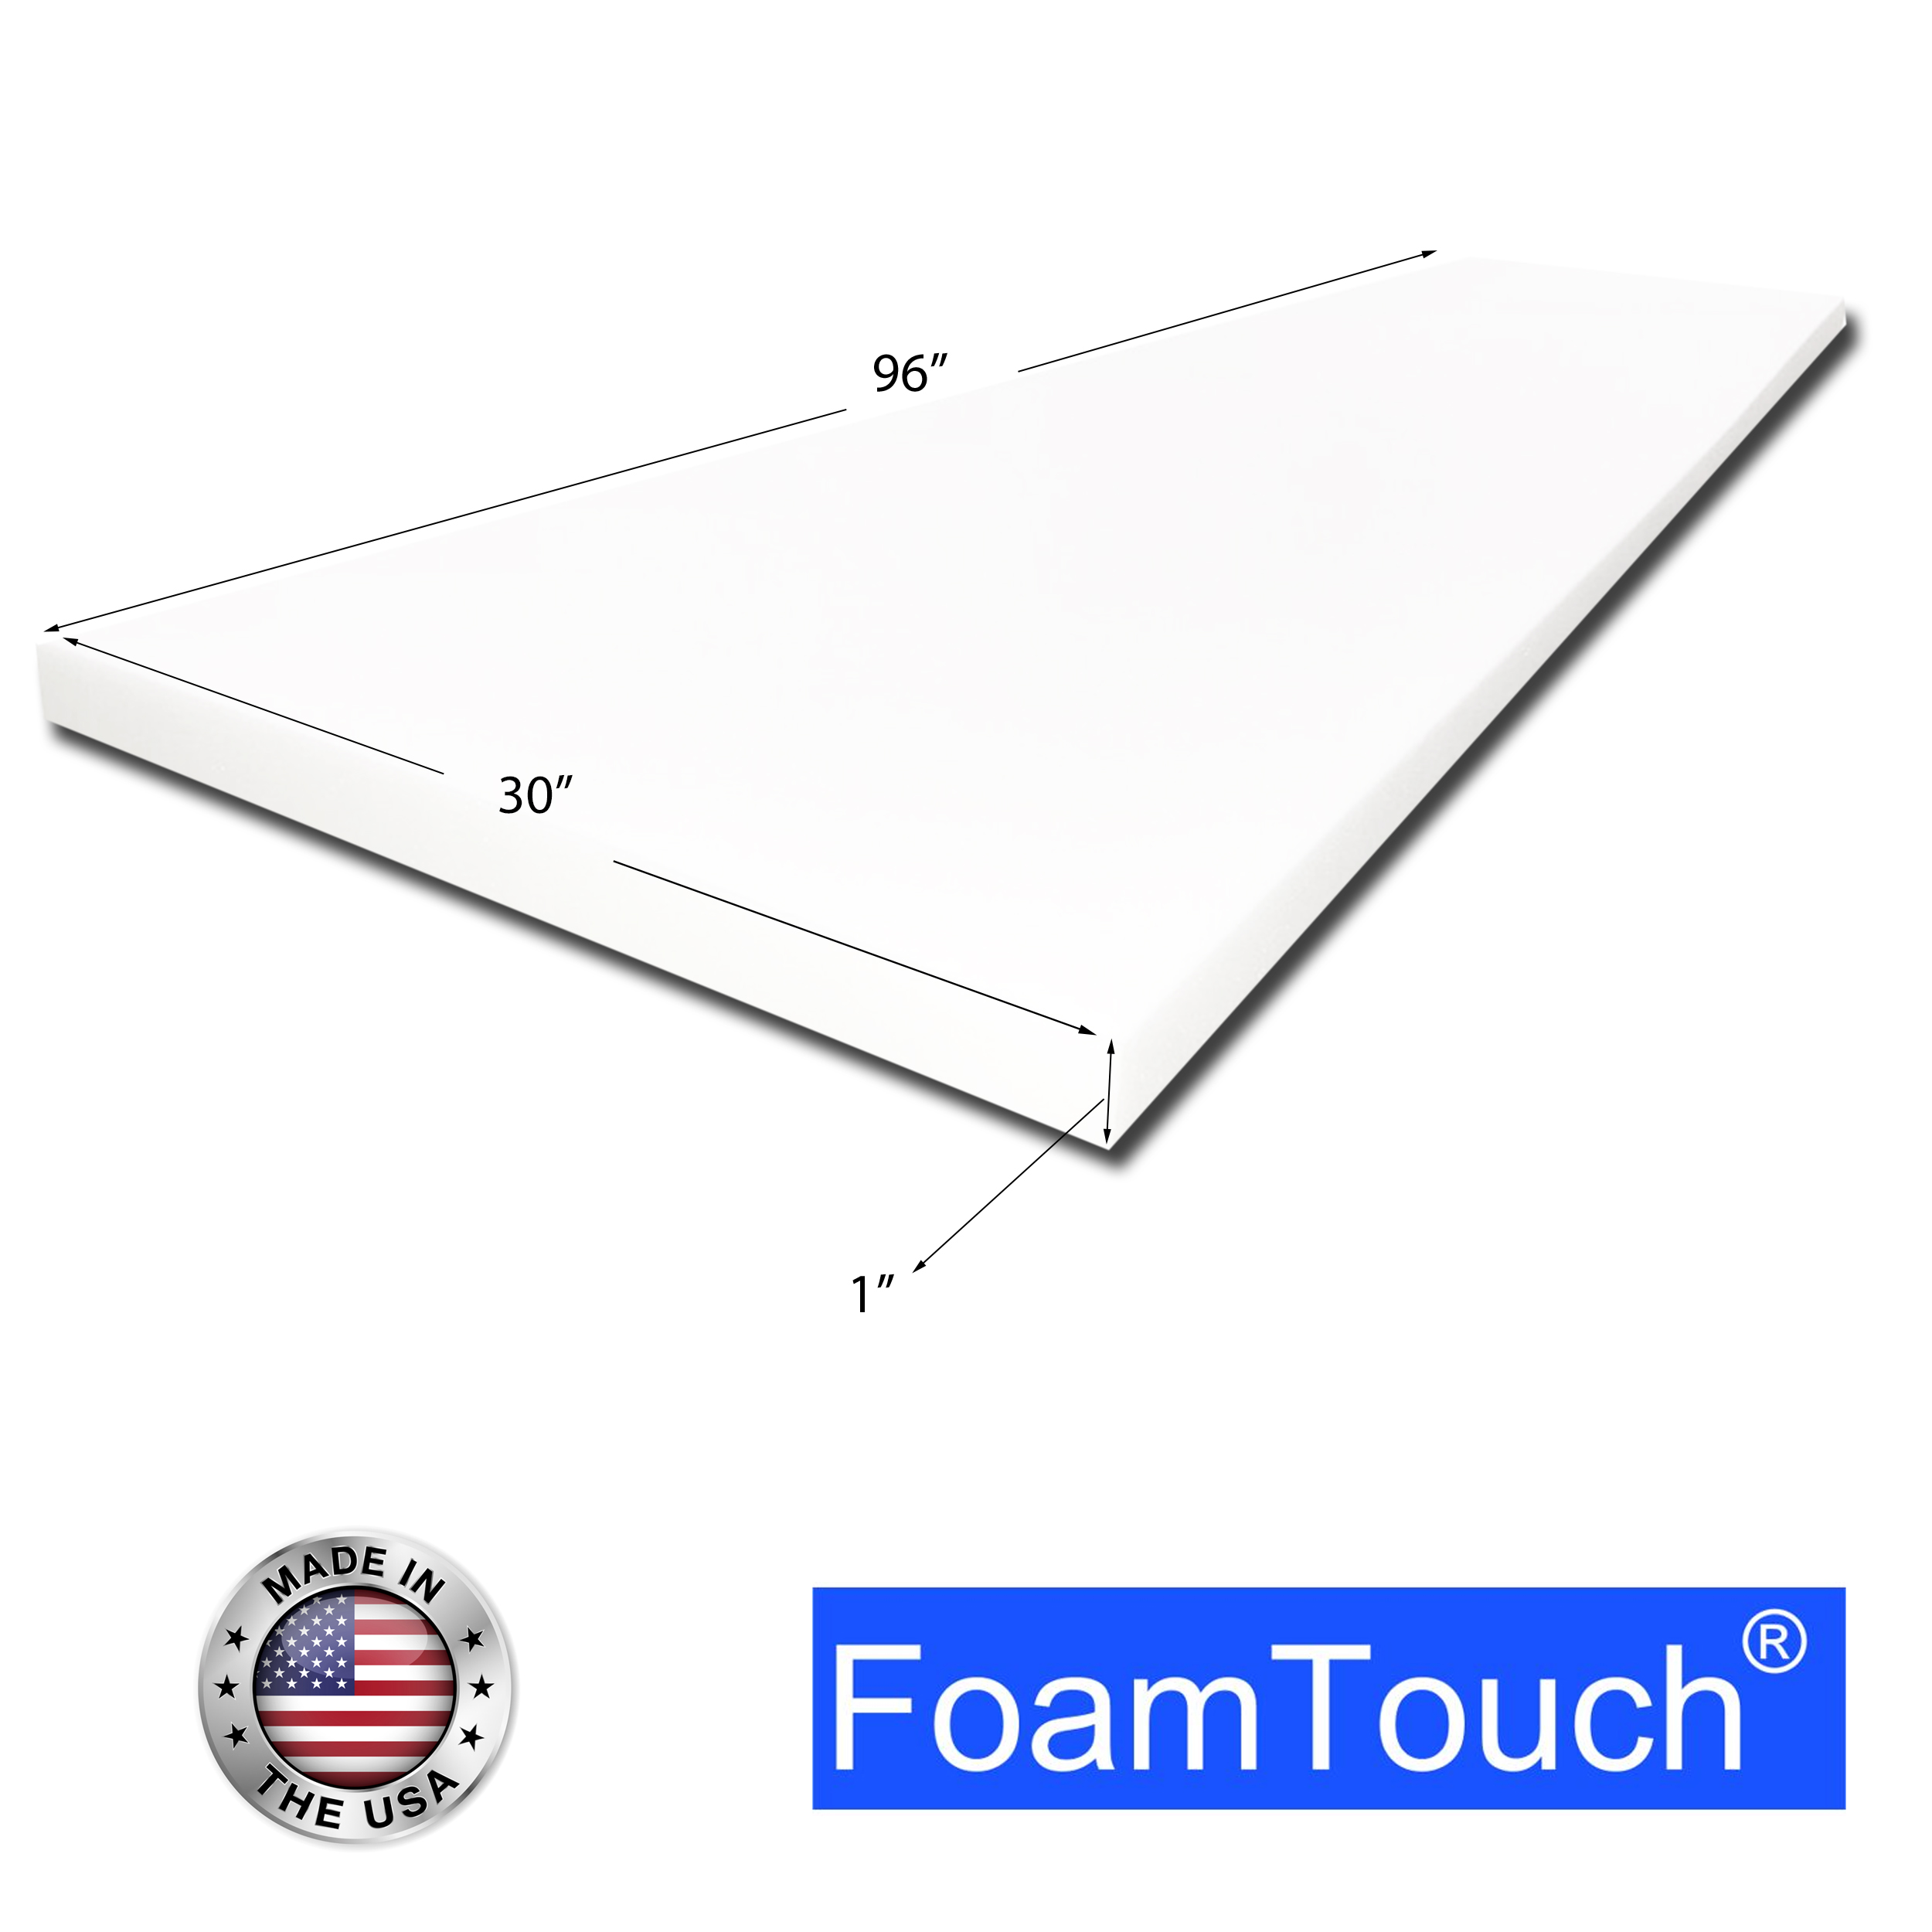 2 pack of FoamTouch High Density 1 Height x 30 Width x 96 Length  Upholstery Foam Cushion Replacement 